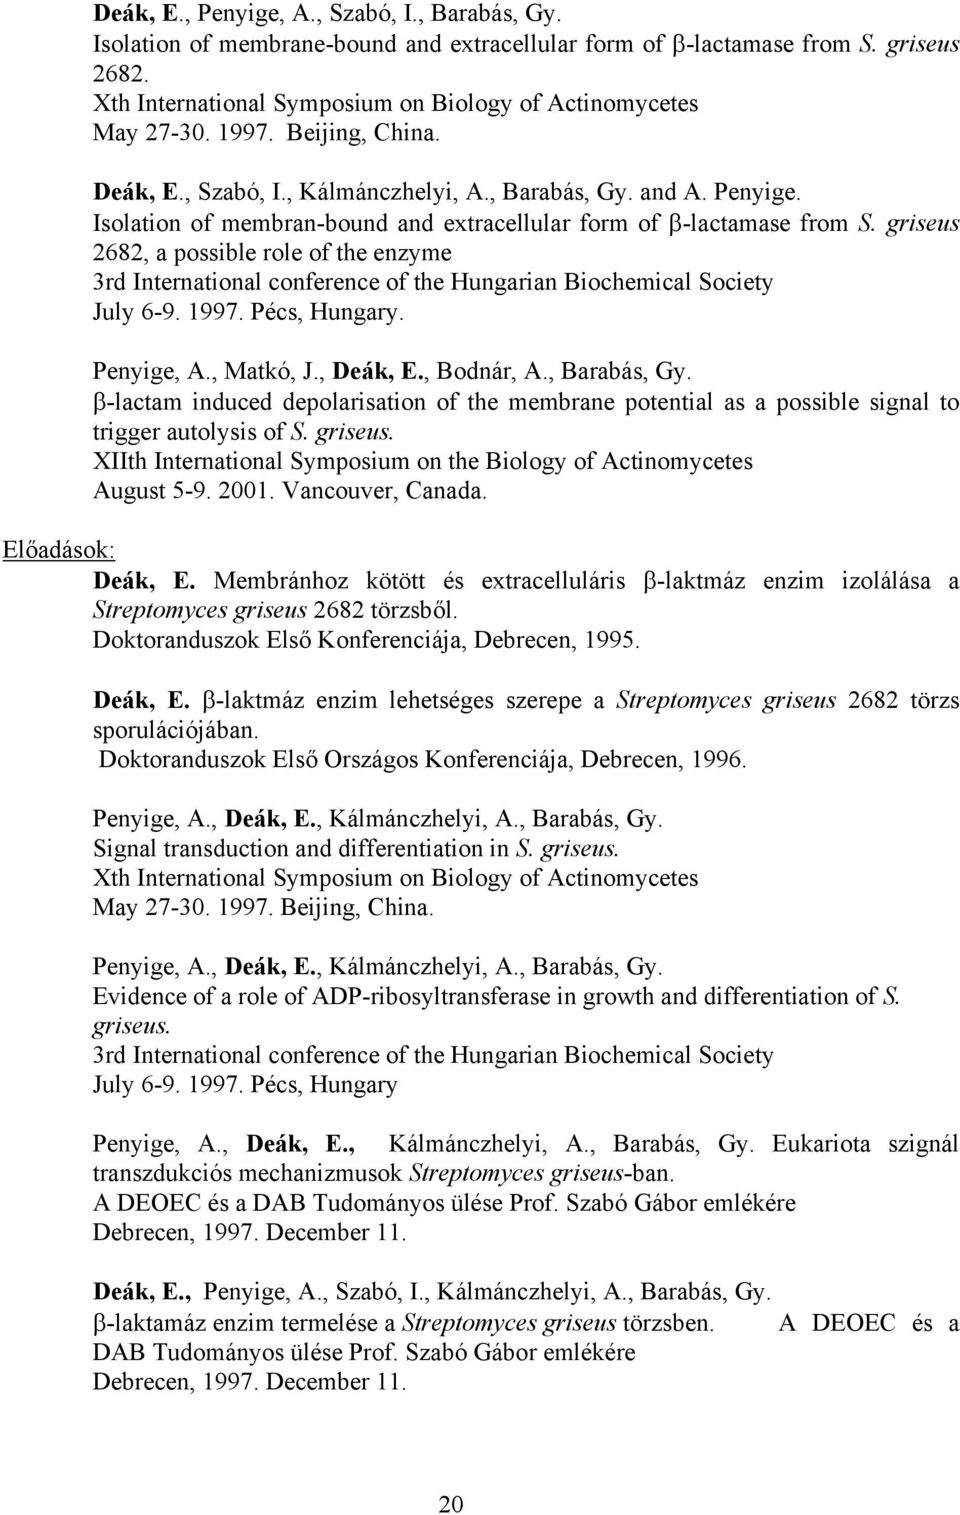 griseus 2682, a possible role of the enzyme 3rd International conference of the Hungarian Biochemical Society July 6-9. 1997. Pécs, Hungary. Penyige, A., Matkó, J., Deák, E., Bodnár, A., Barabás, Gy.